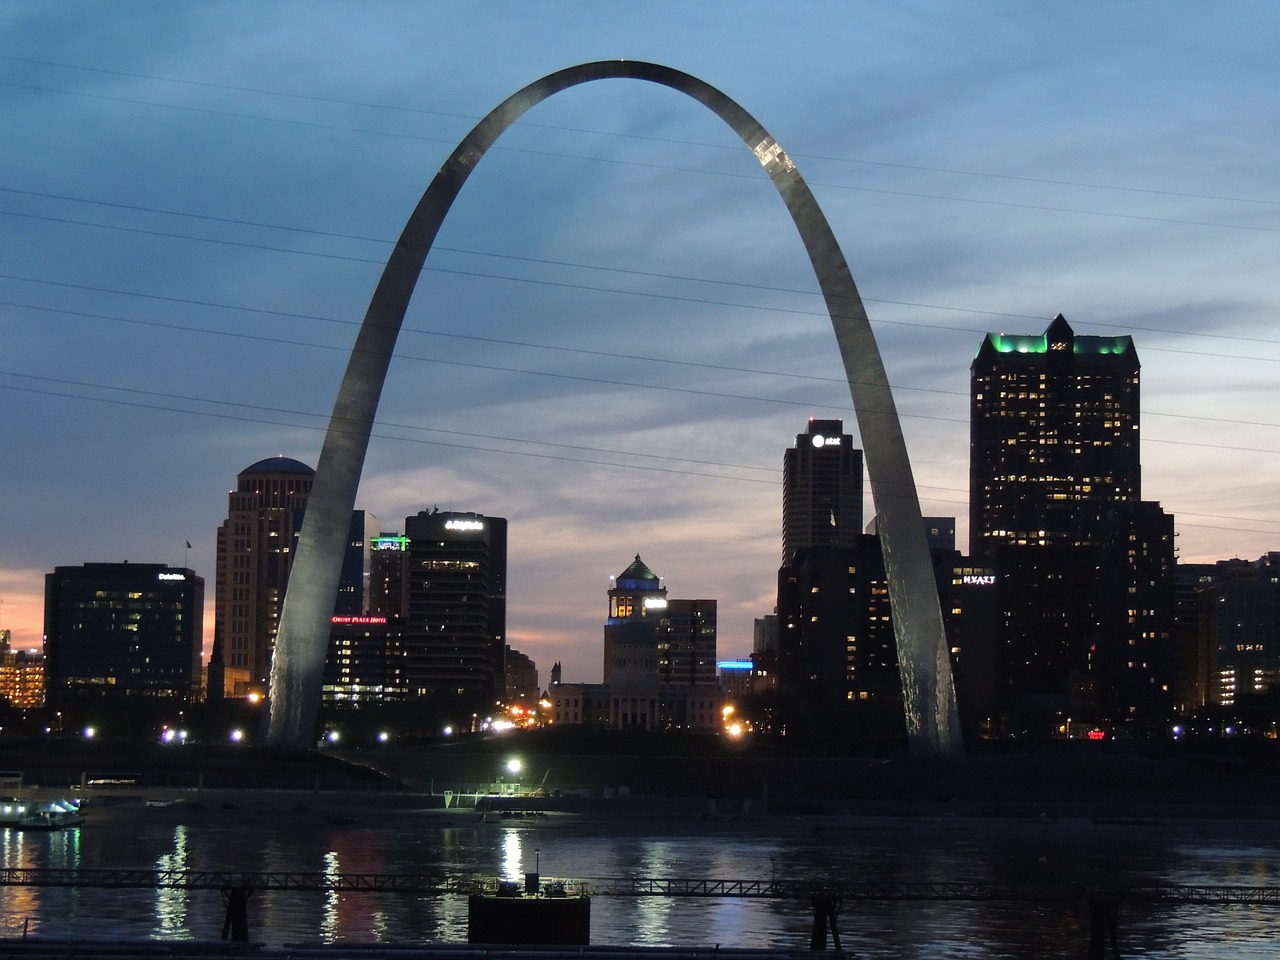 St. Louis 4-Day Adventure with City Tours and Culinary Delights